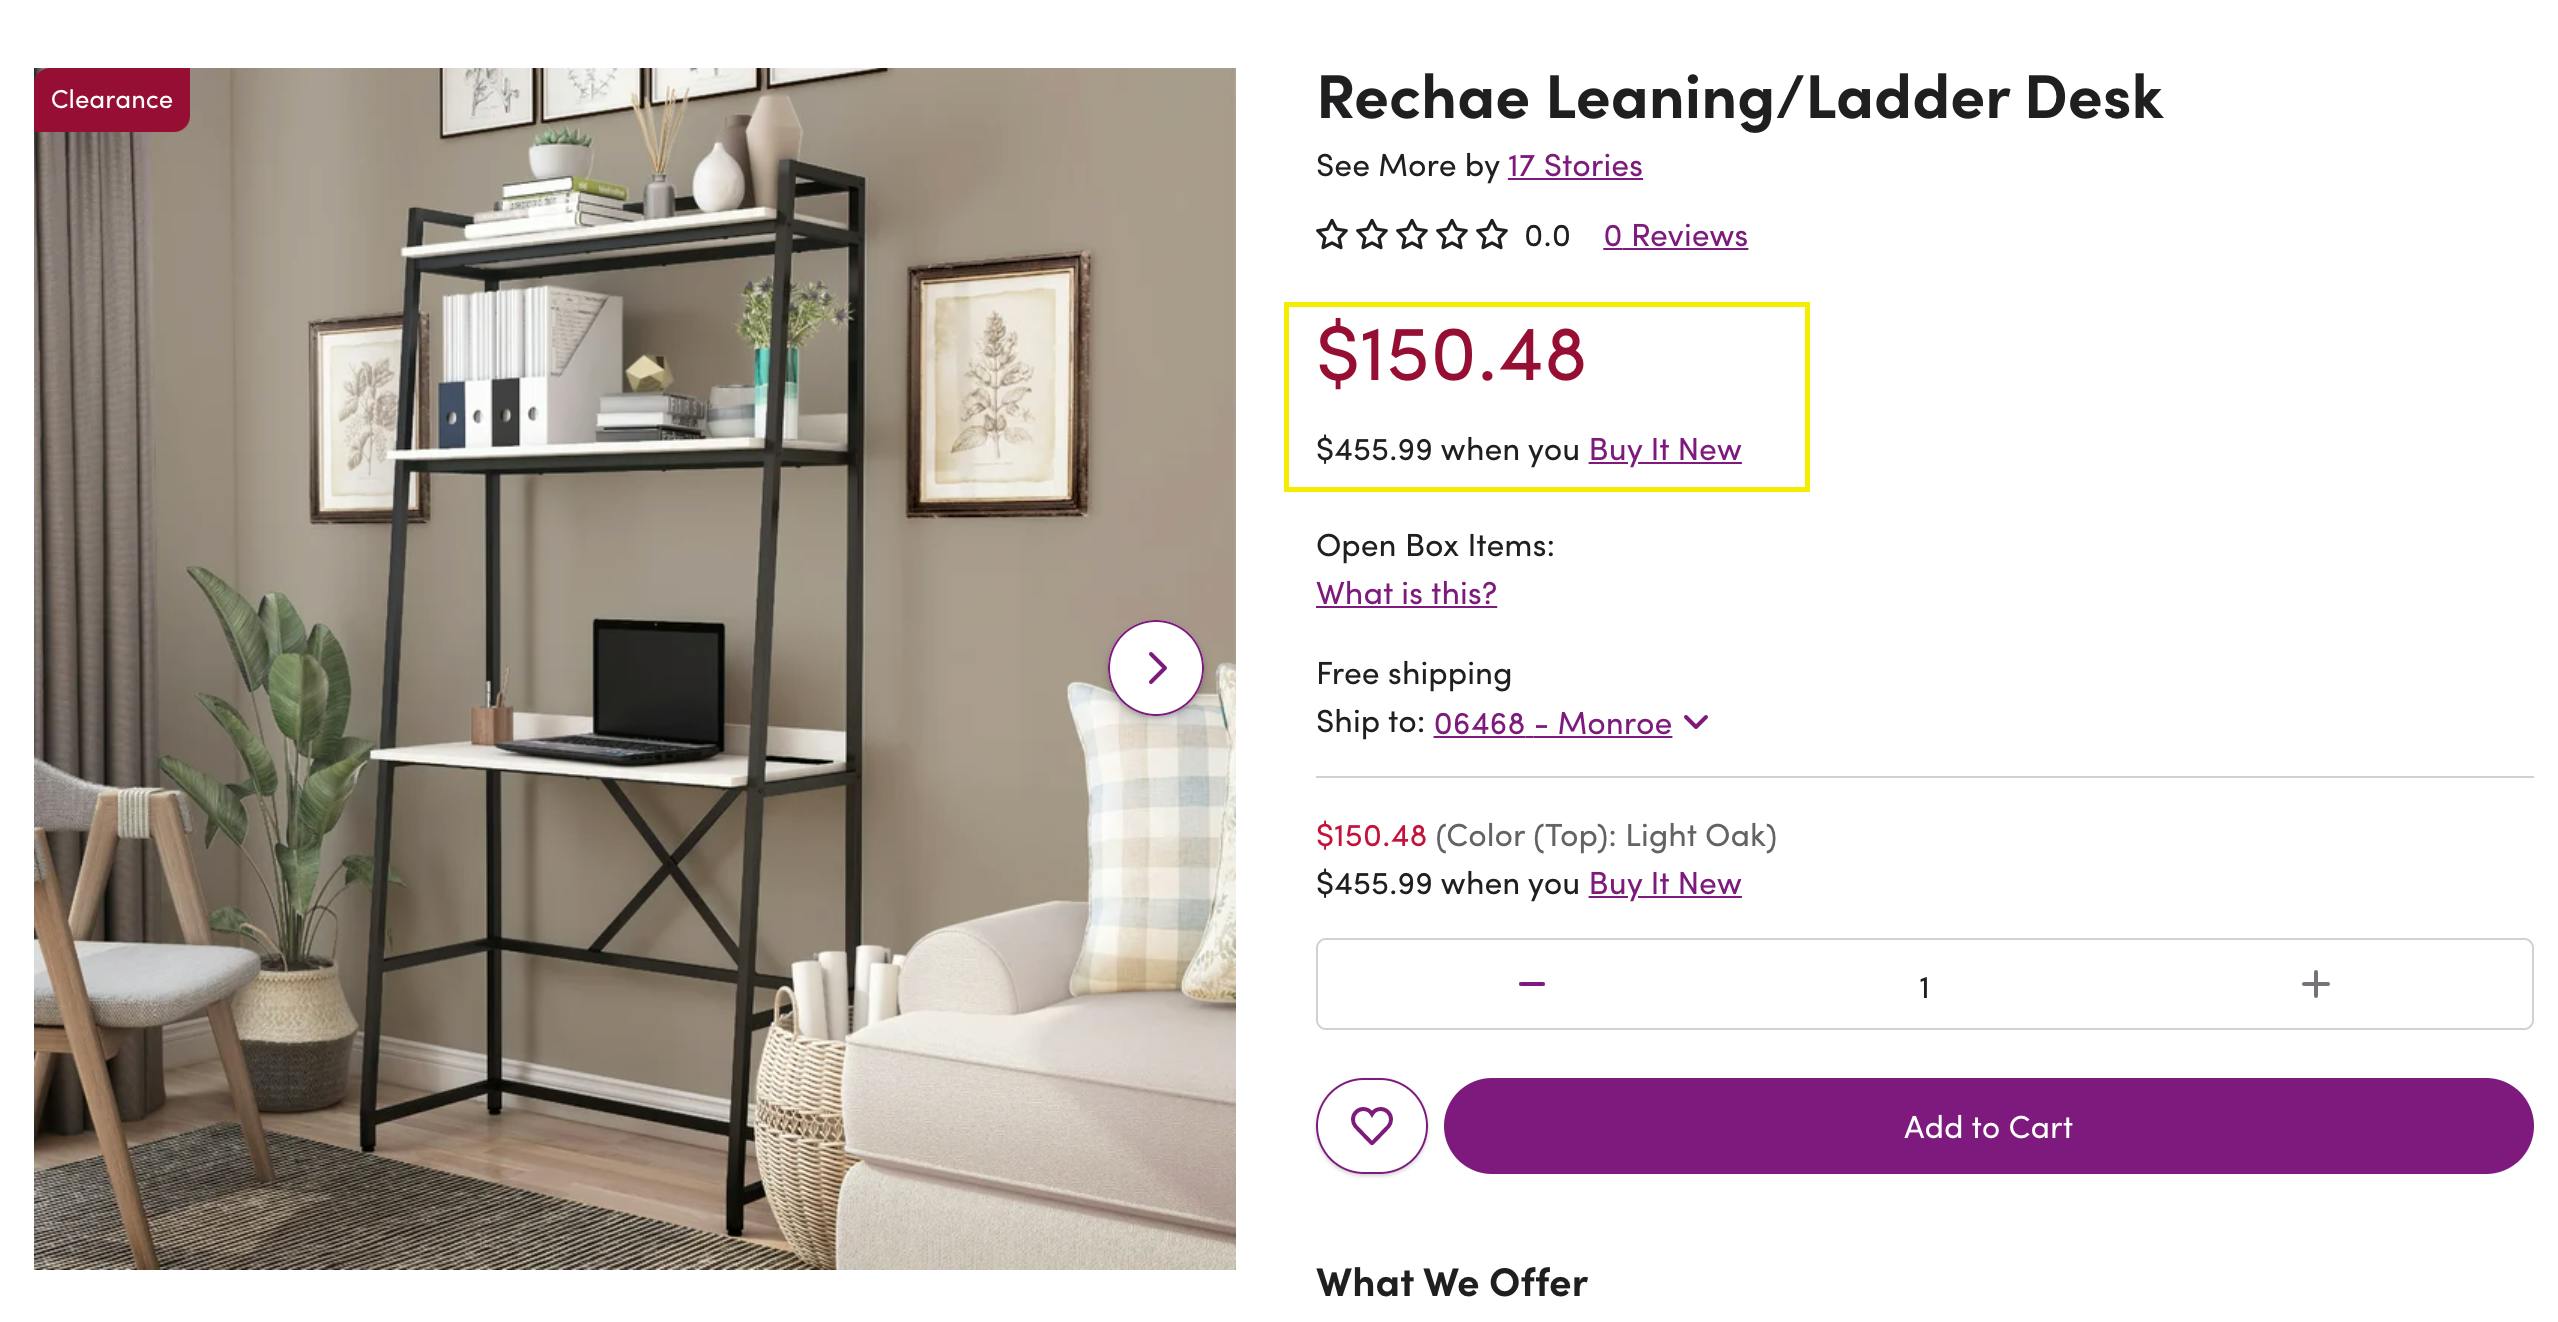 The Rechae Leaning/Ladder Desk on Wayfair with an Open Box Price of $150.48